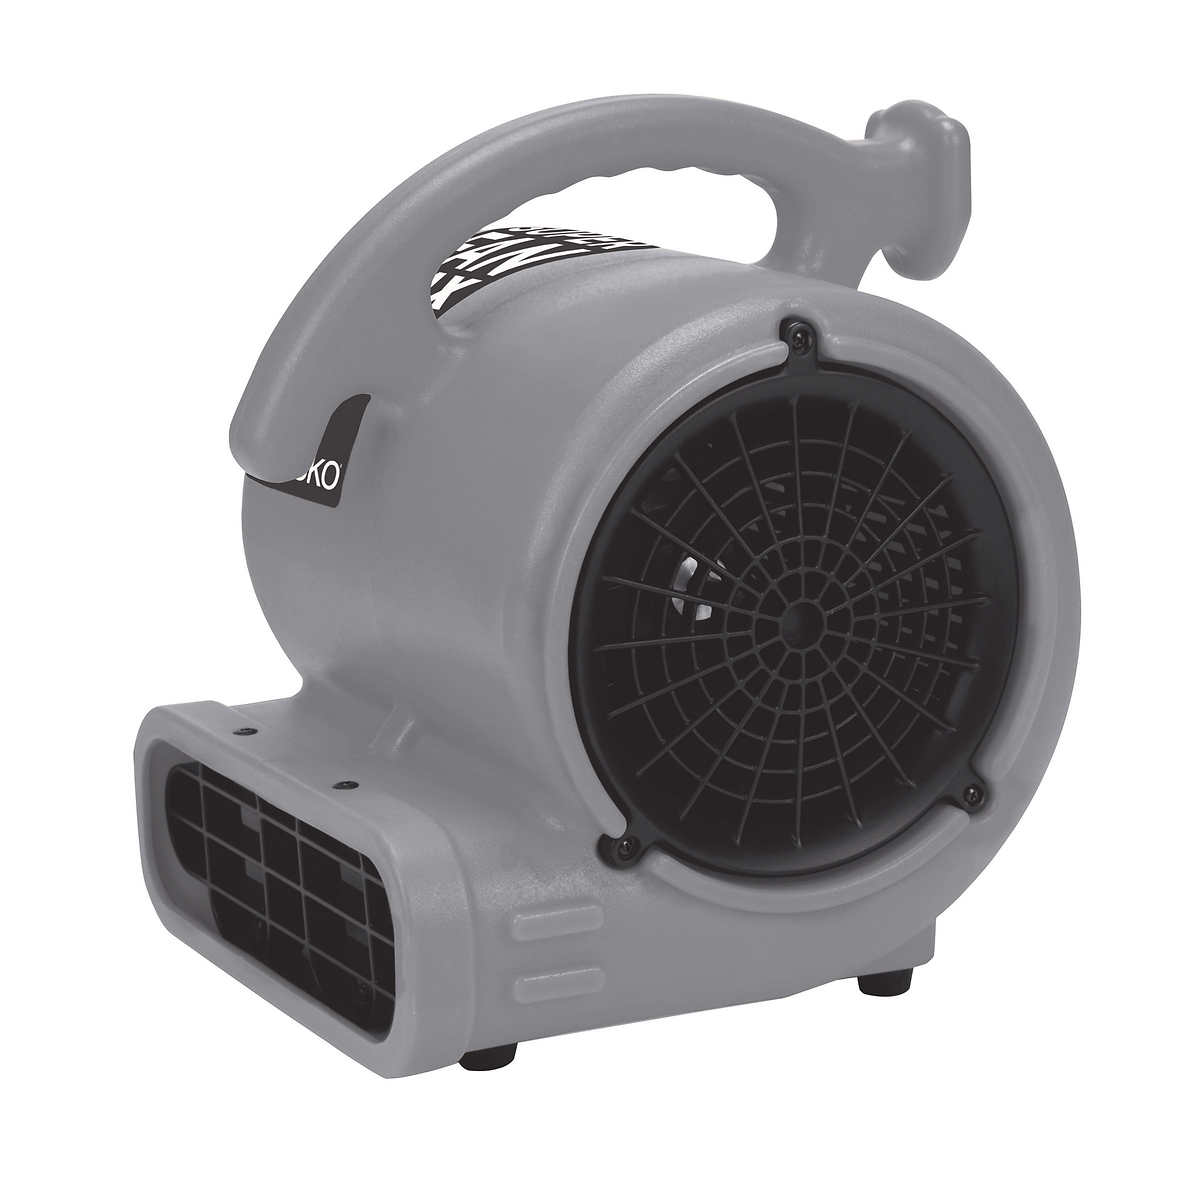 Lasko SF-20-G High Velocity Super Fan Max Air Mover Floor Fan with 3 Speeds